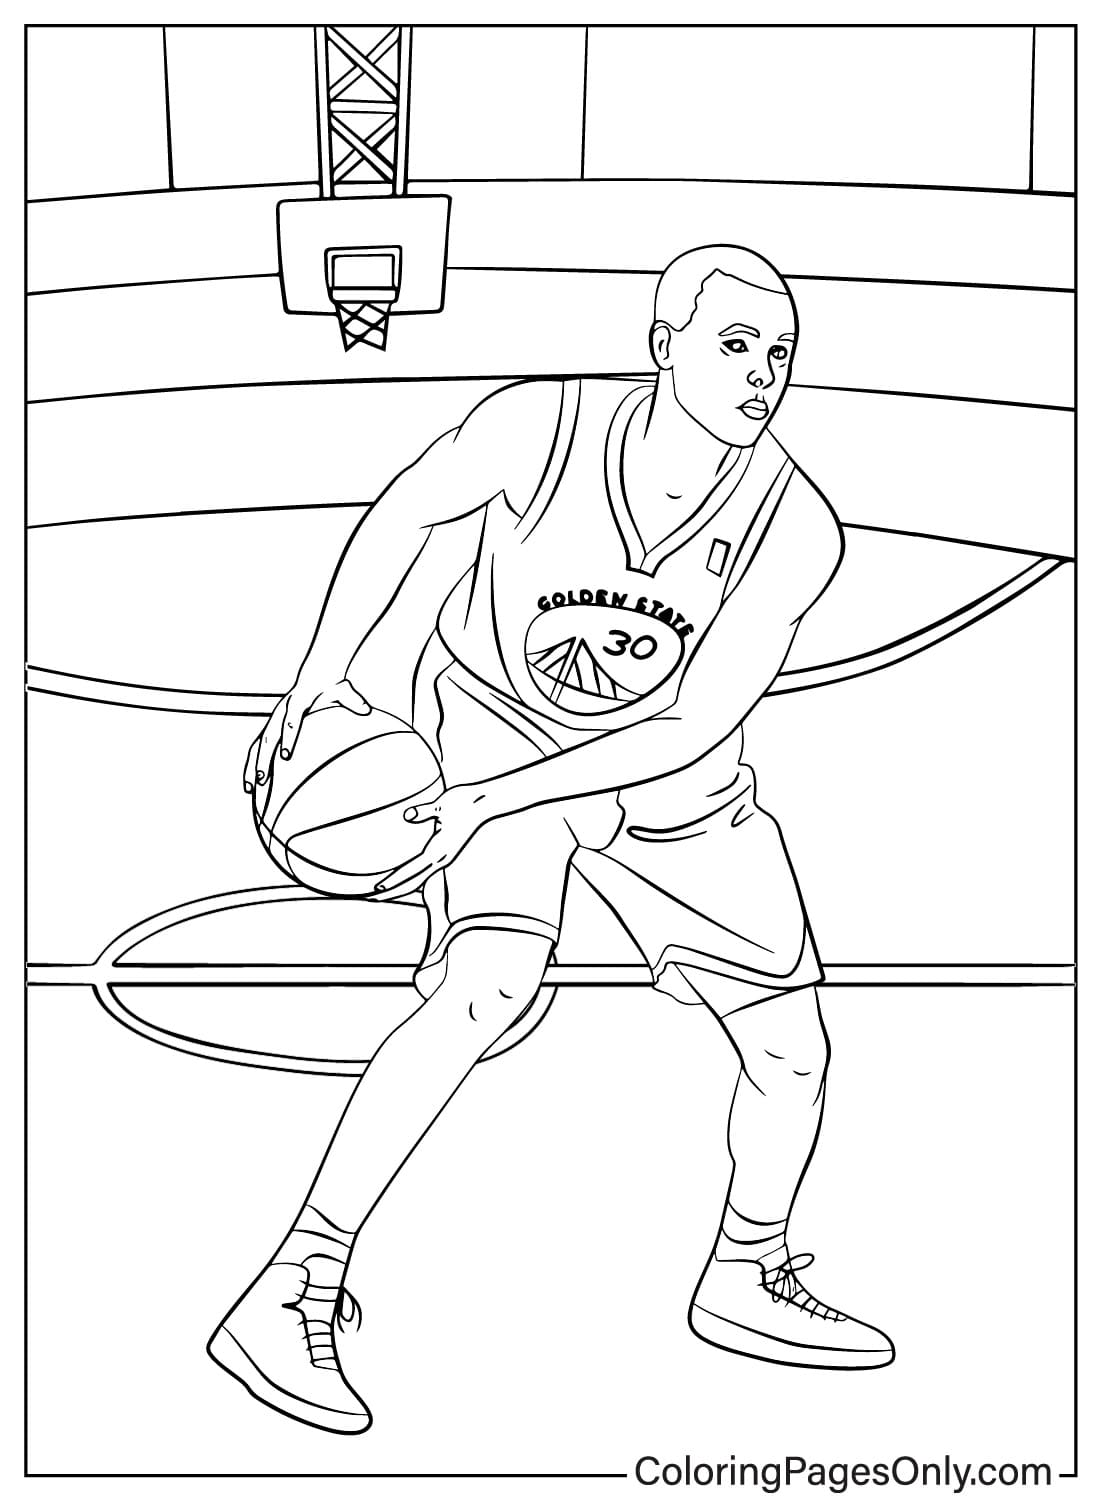 Drawing Stephen Curry Coloring Page - Free Printable Coloring Pages